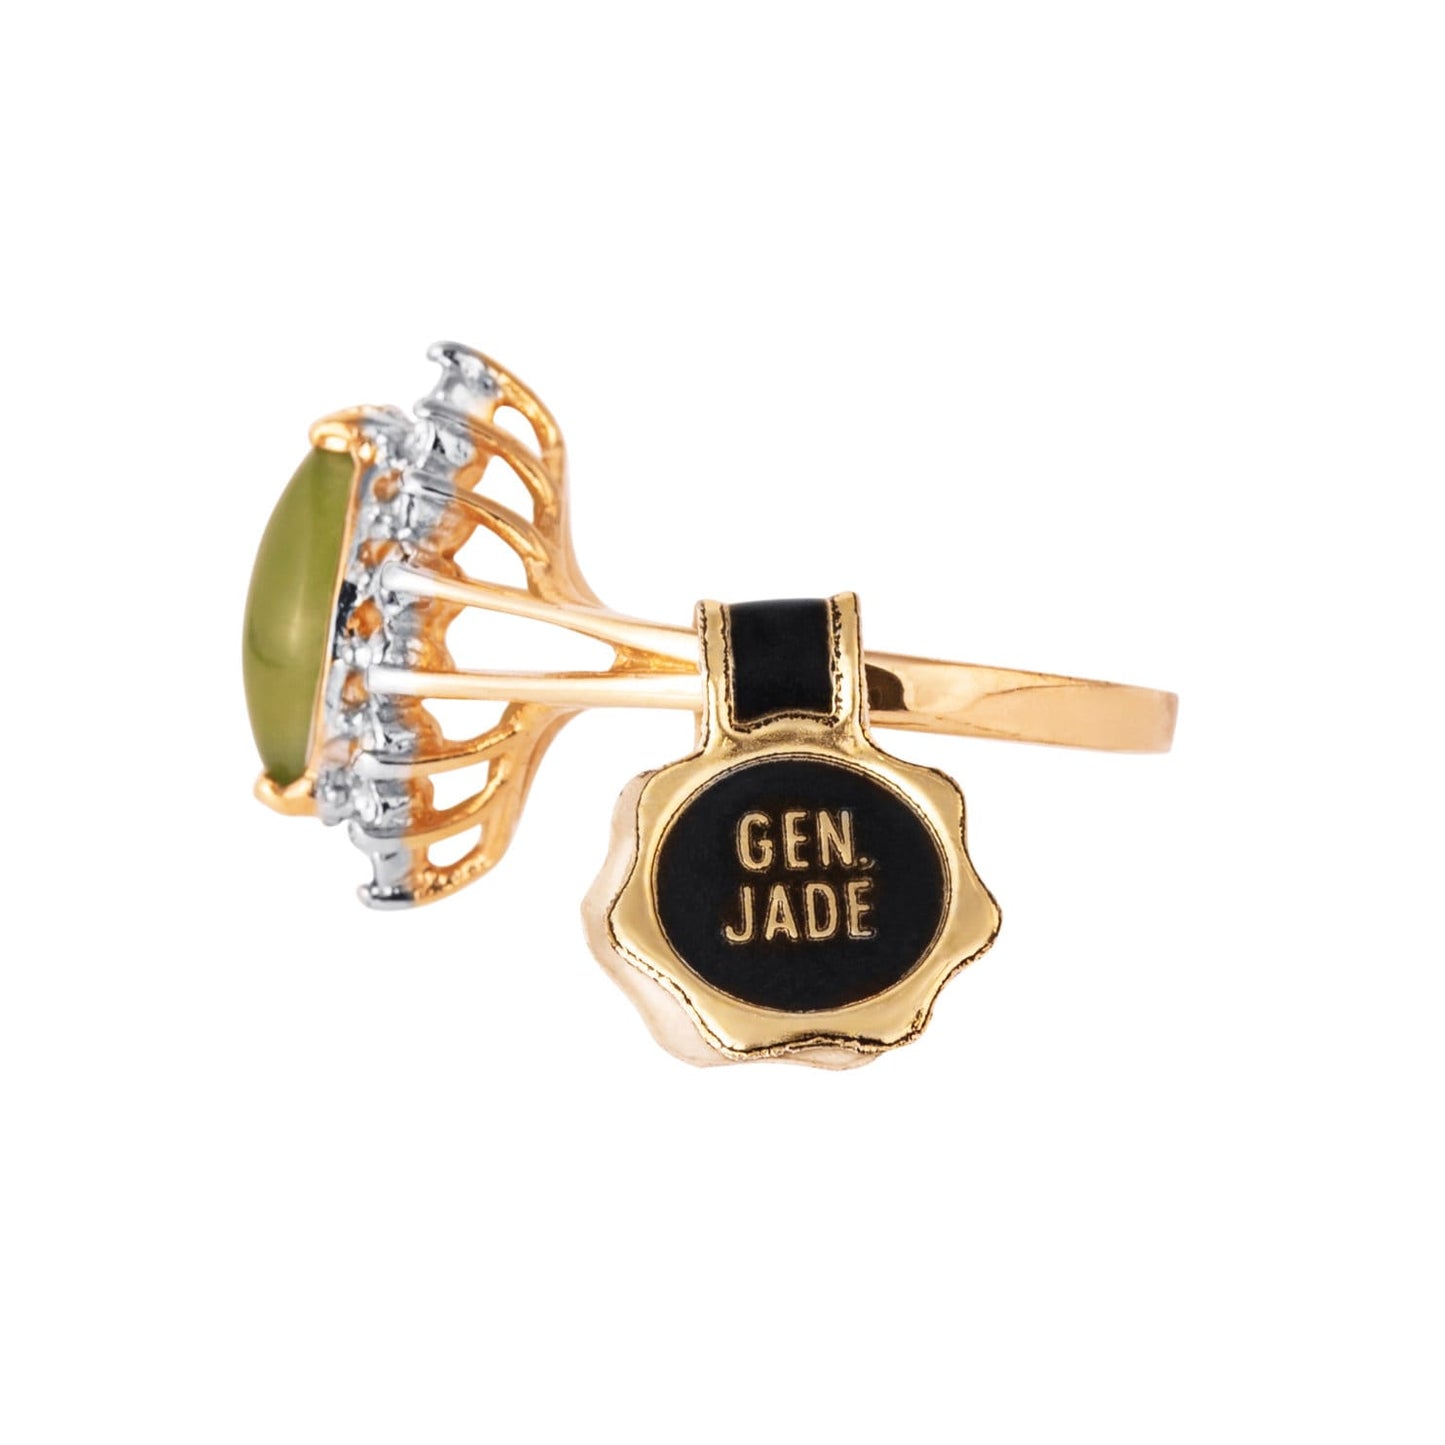 Vintage Ring Genuine Jade and Clear Swarovski Crystals 18k Gold Plated August Birthstone Antique Woman #R1891 - Limited Stock - Never Worn